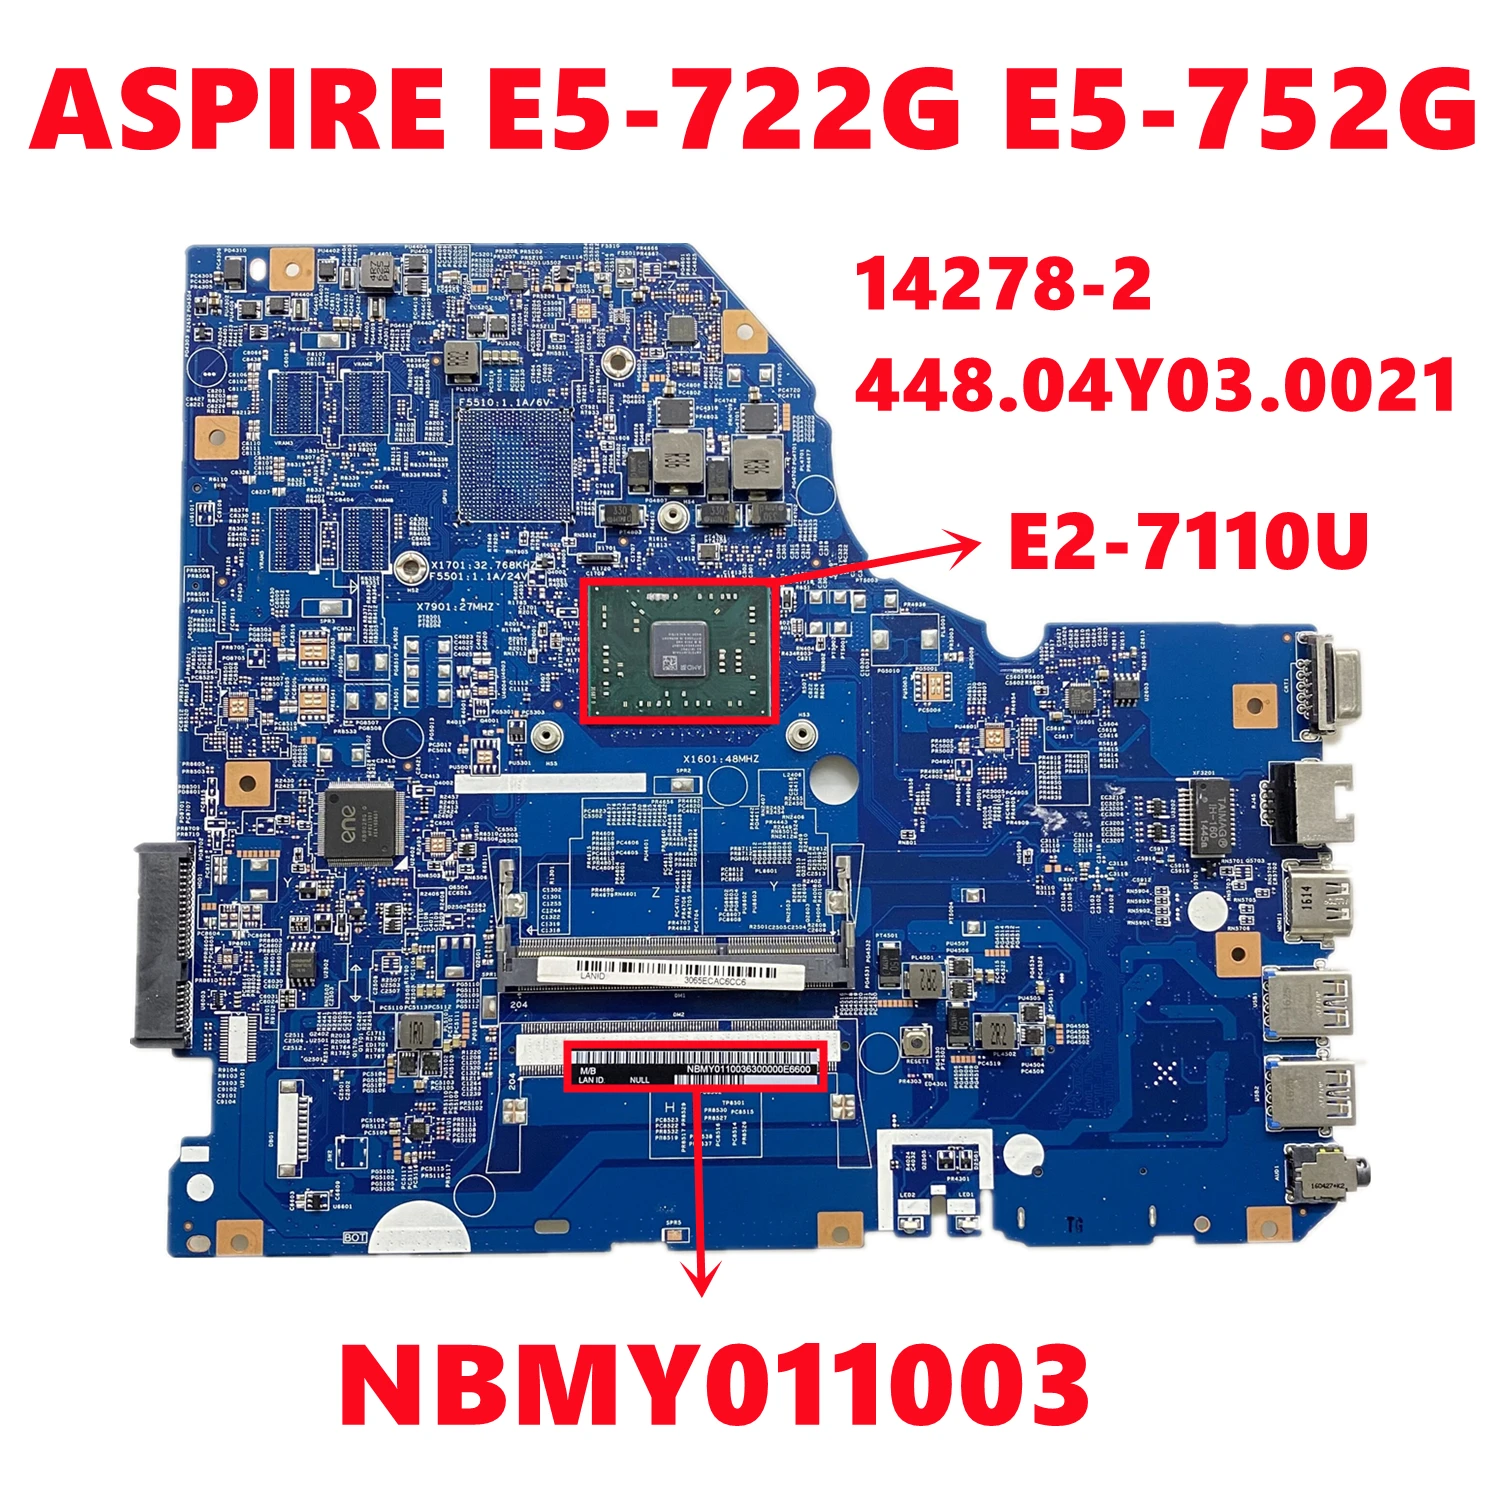 

NBMY011003 NB.MY011.003 For Acer ASPIRE E5-722G E5-752G Laptop Motherboard 14278-2 448.04Y03.0021 With E2-7110U CPU 100% Tested